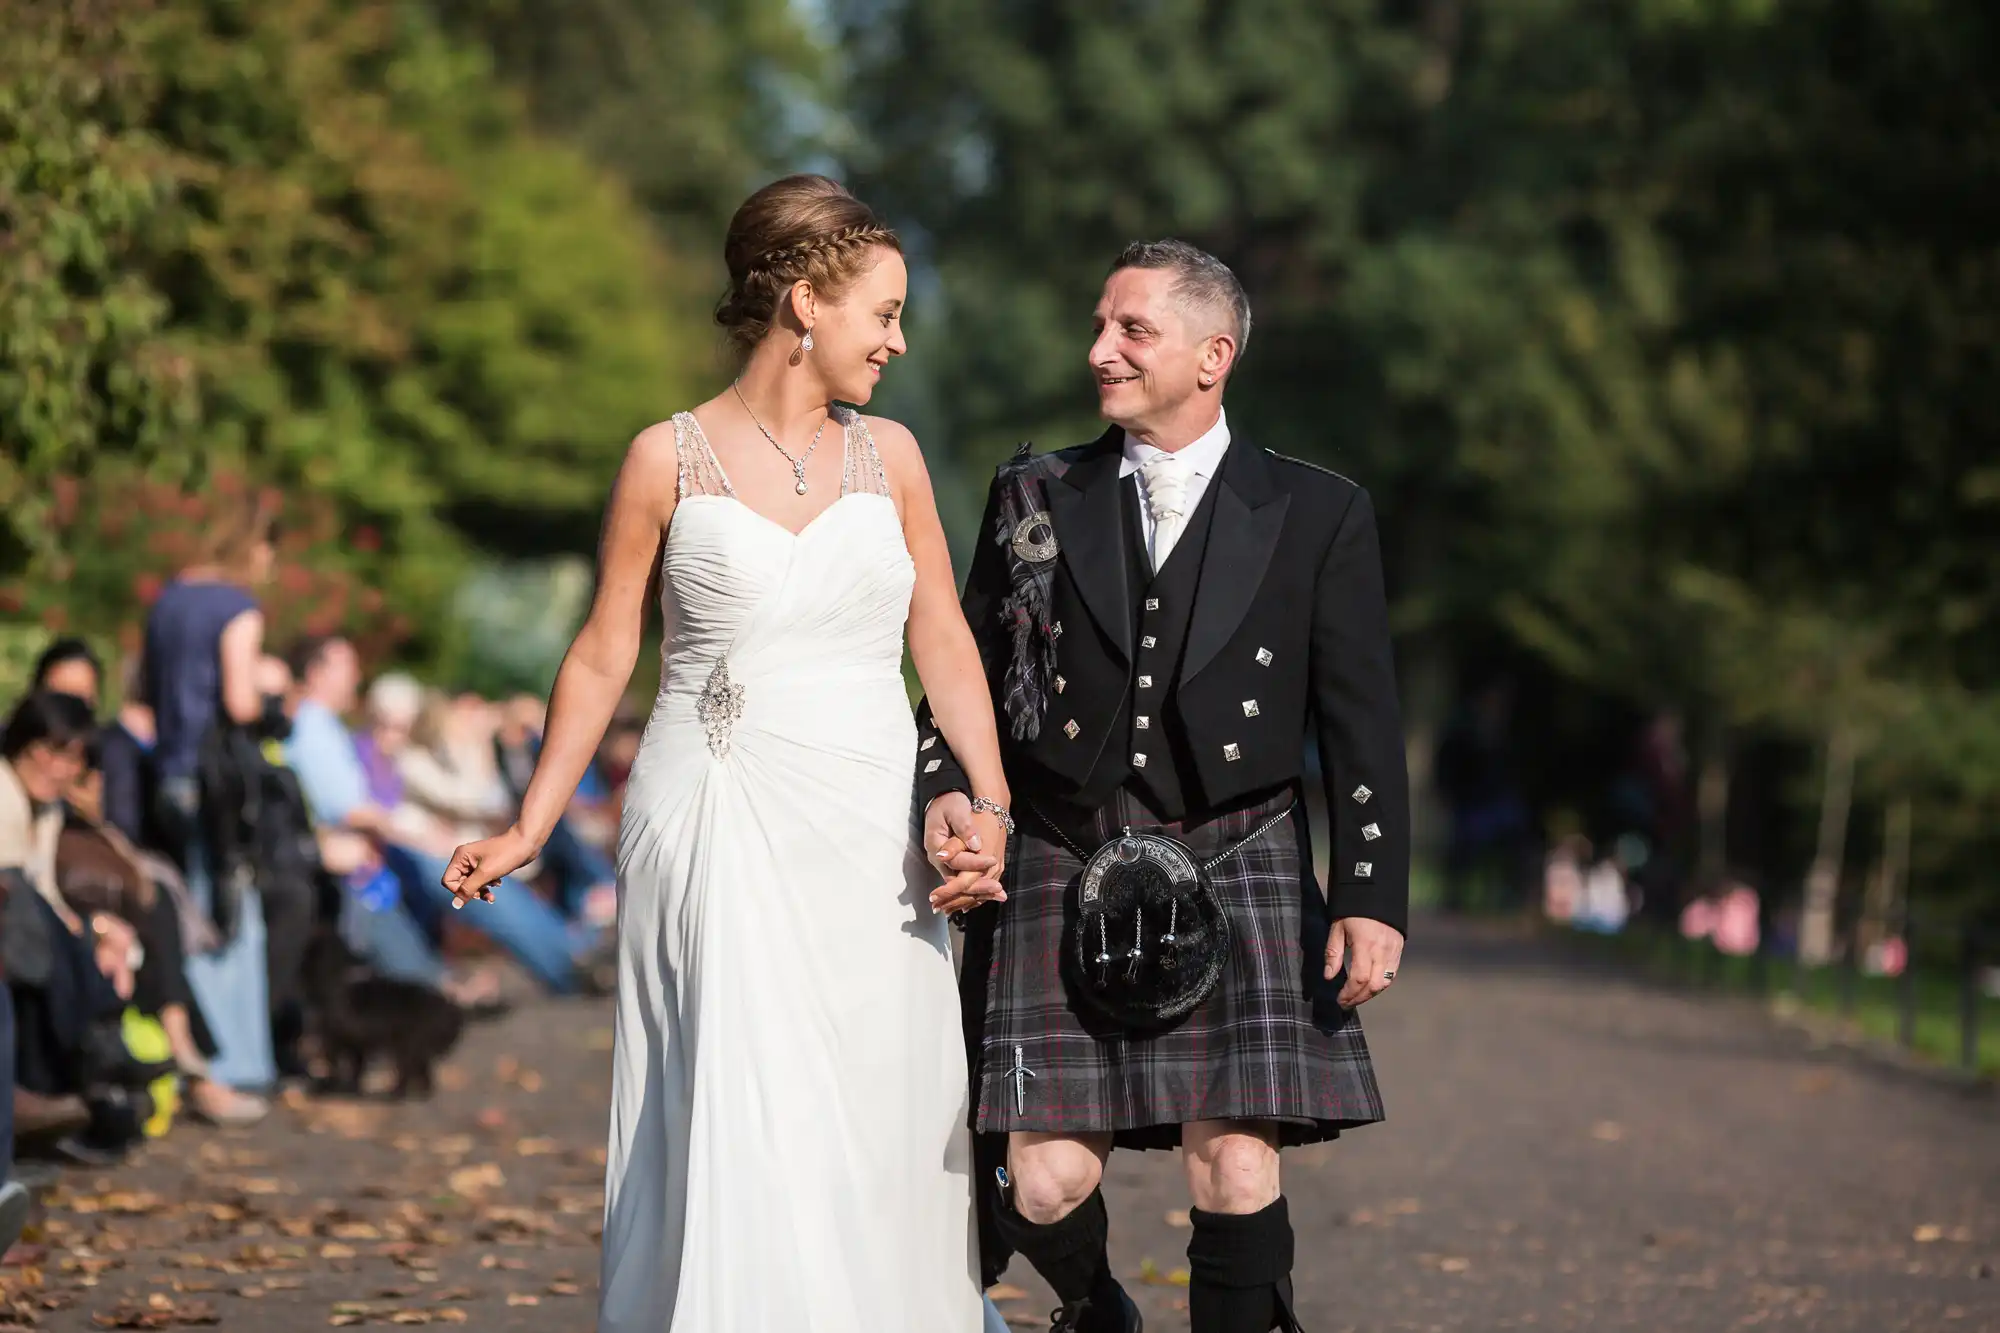 Bride in a white dress and groom in a kilt smiling and holding hands while walking down a park alley, with spectators seated on benches.